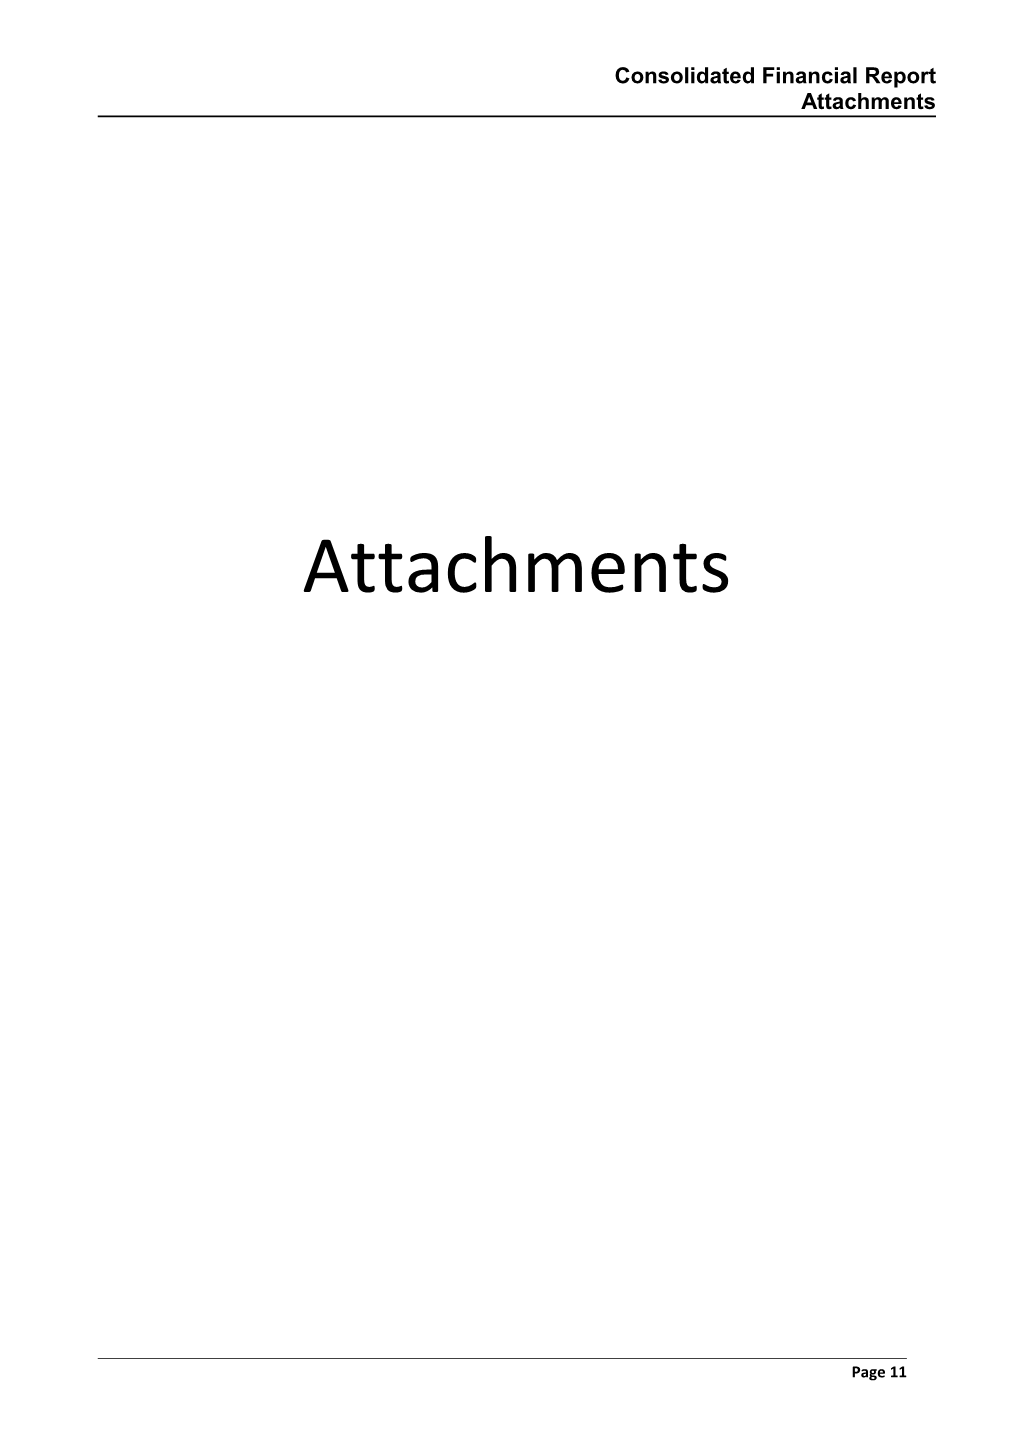 Attachments to March 2013 Consolidated Financial Report